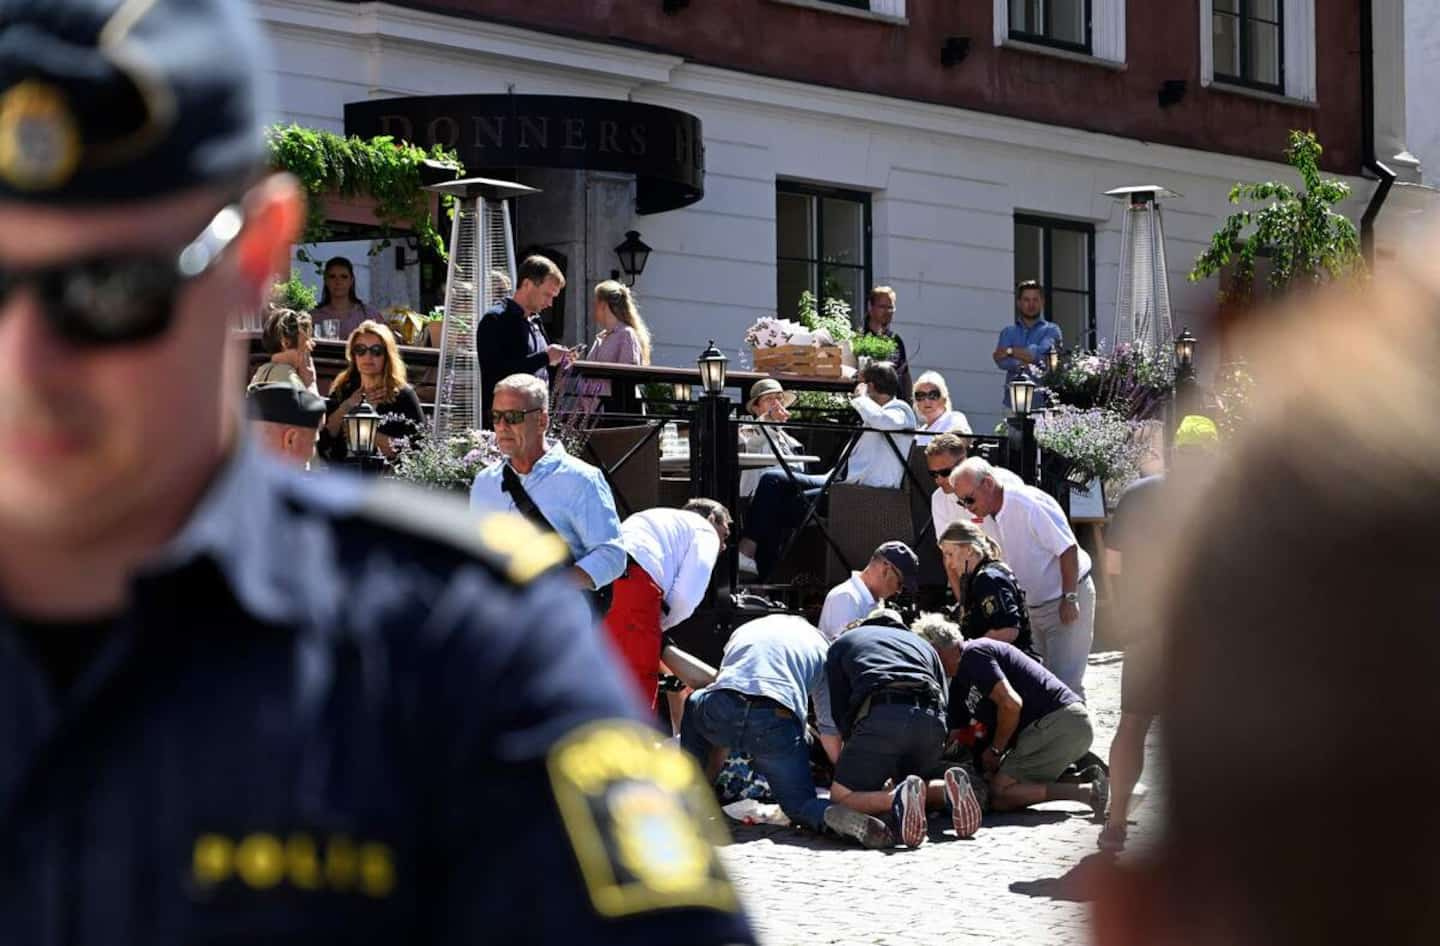 Sweden: one dead in a knife attack at a political event